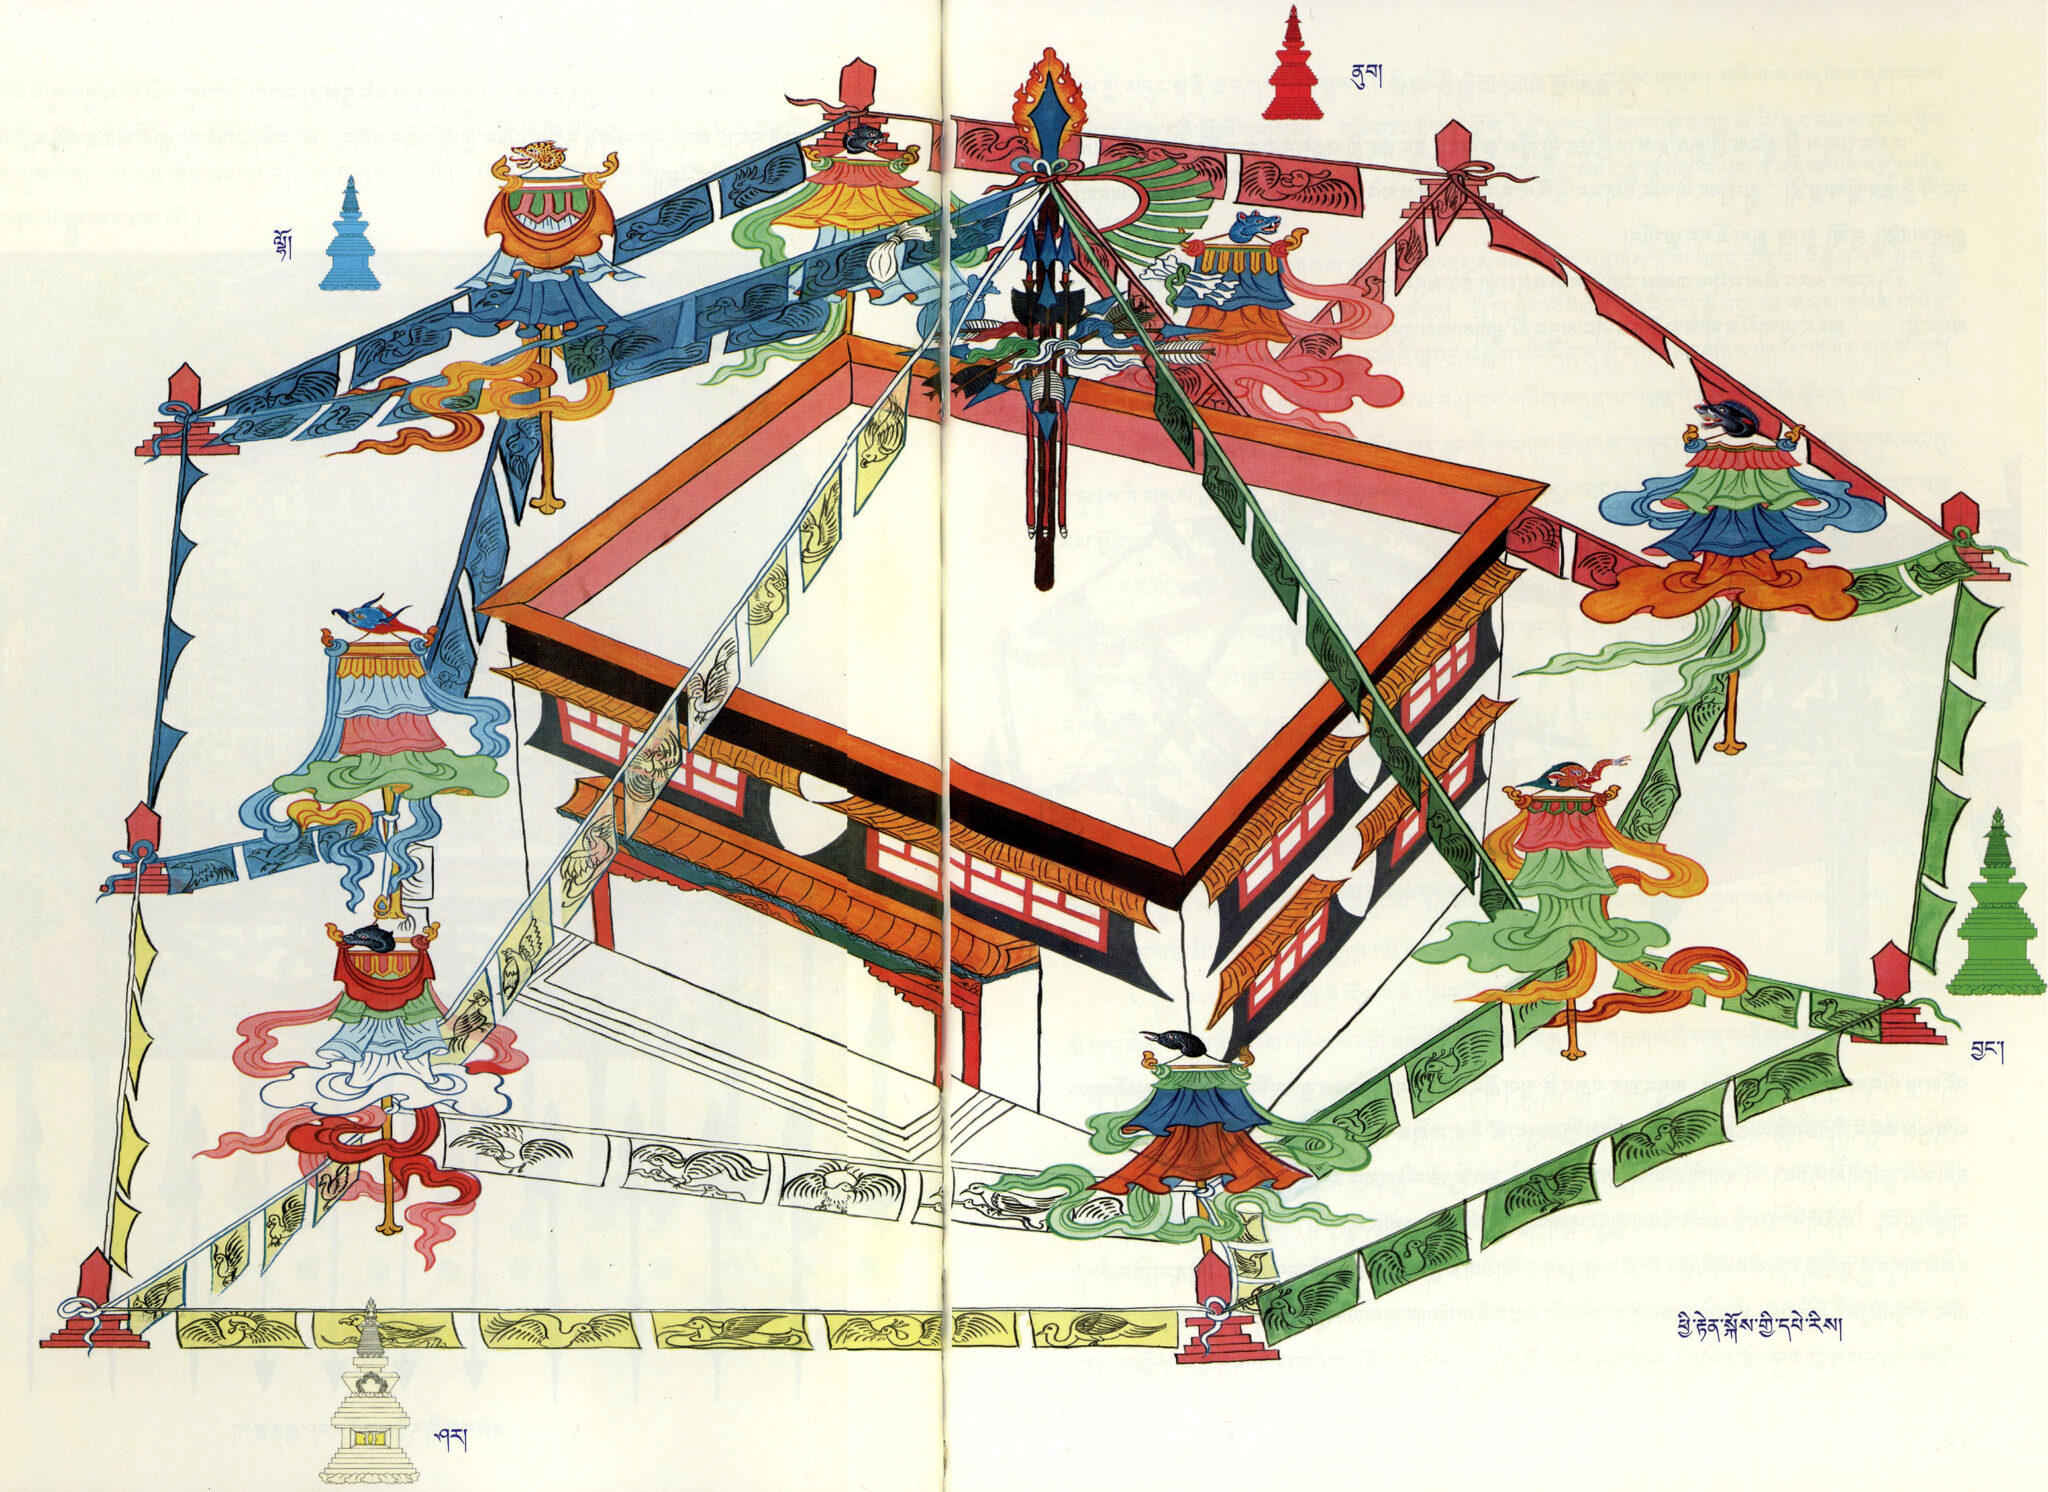 Three-dimensional color diagram depicting building encircled by prayer flags hung from spire at center of structure